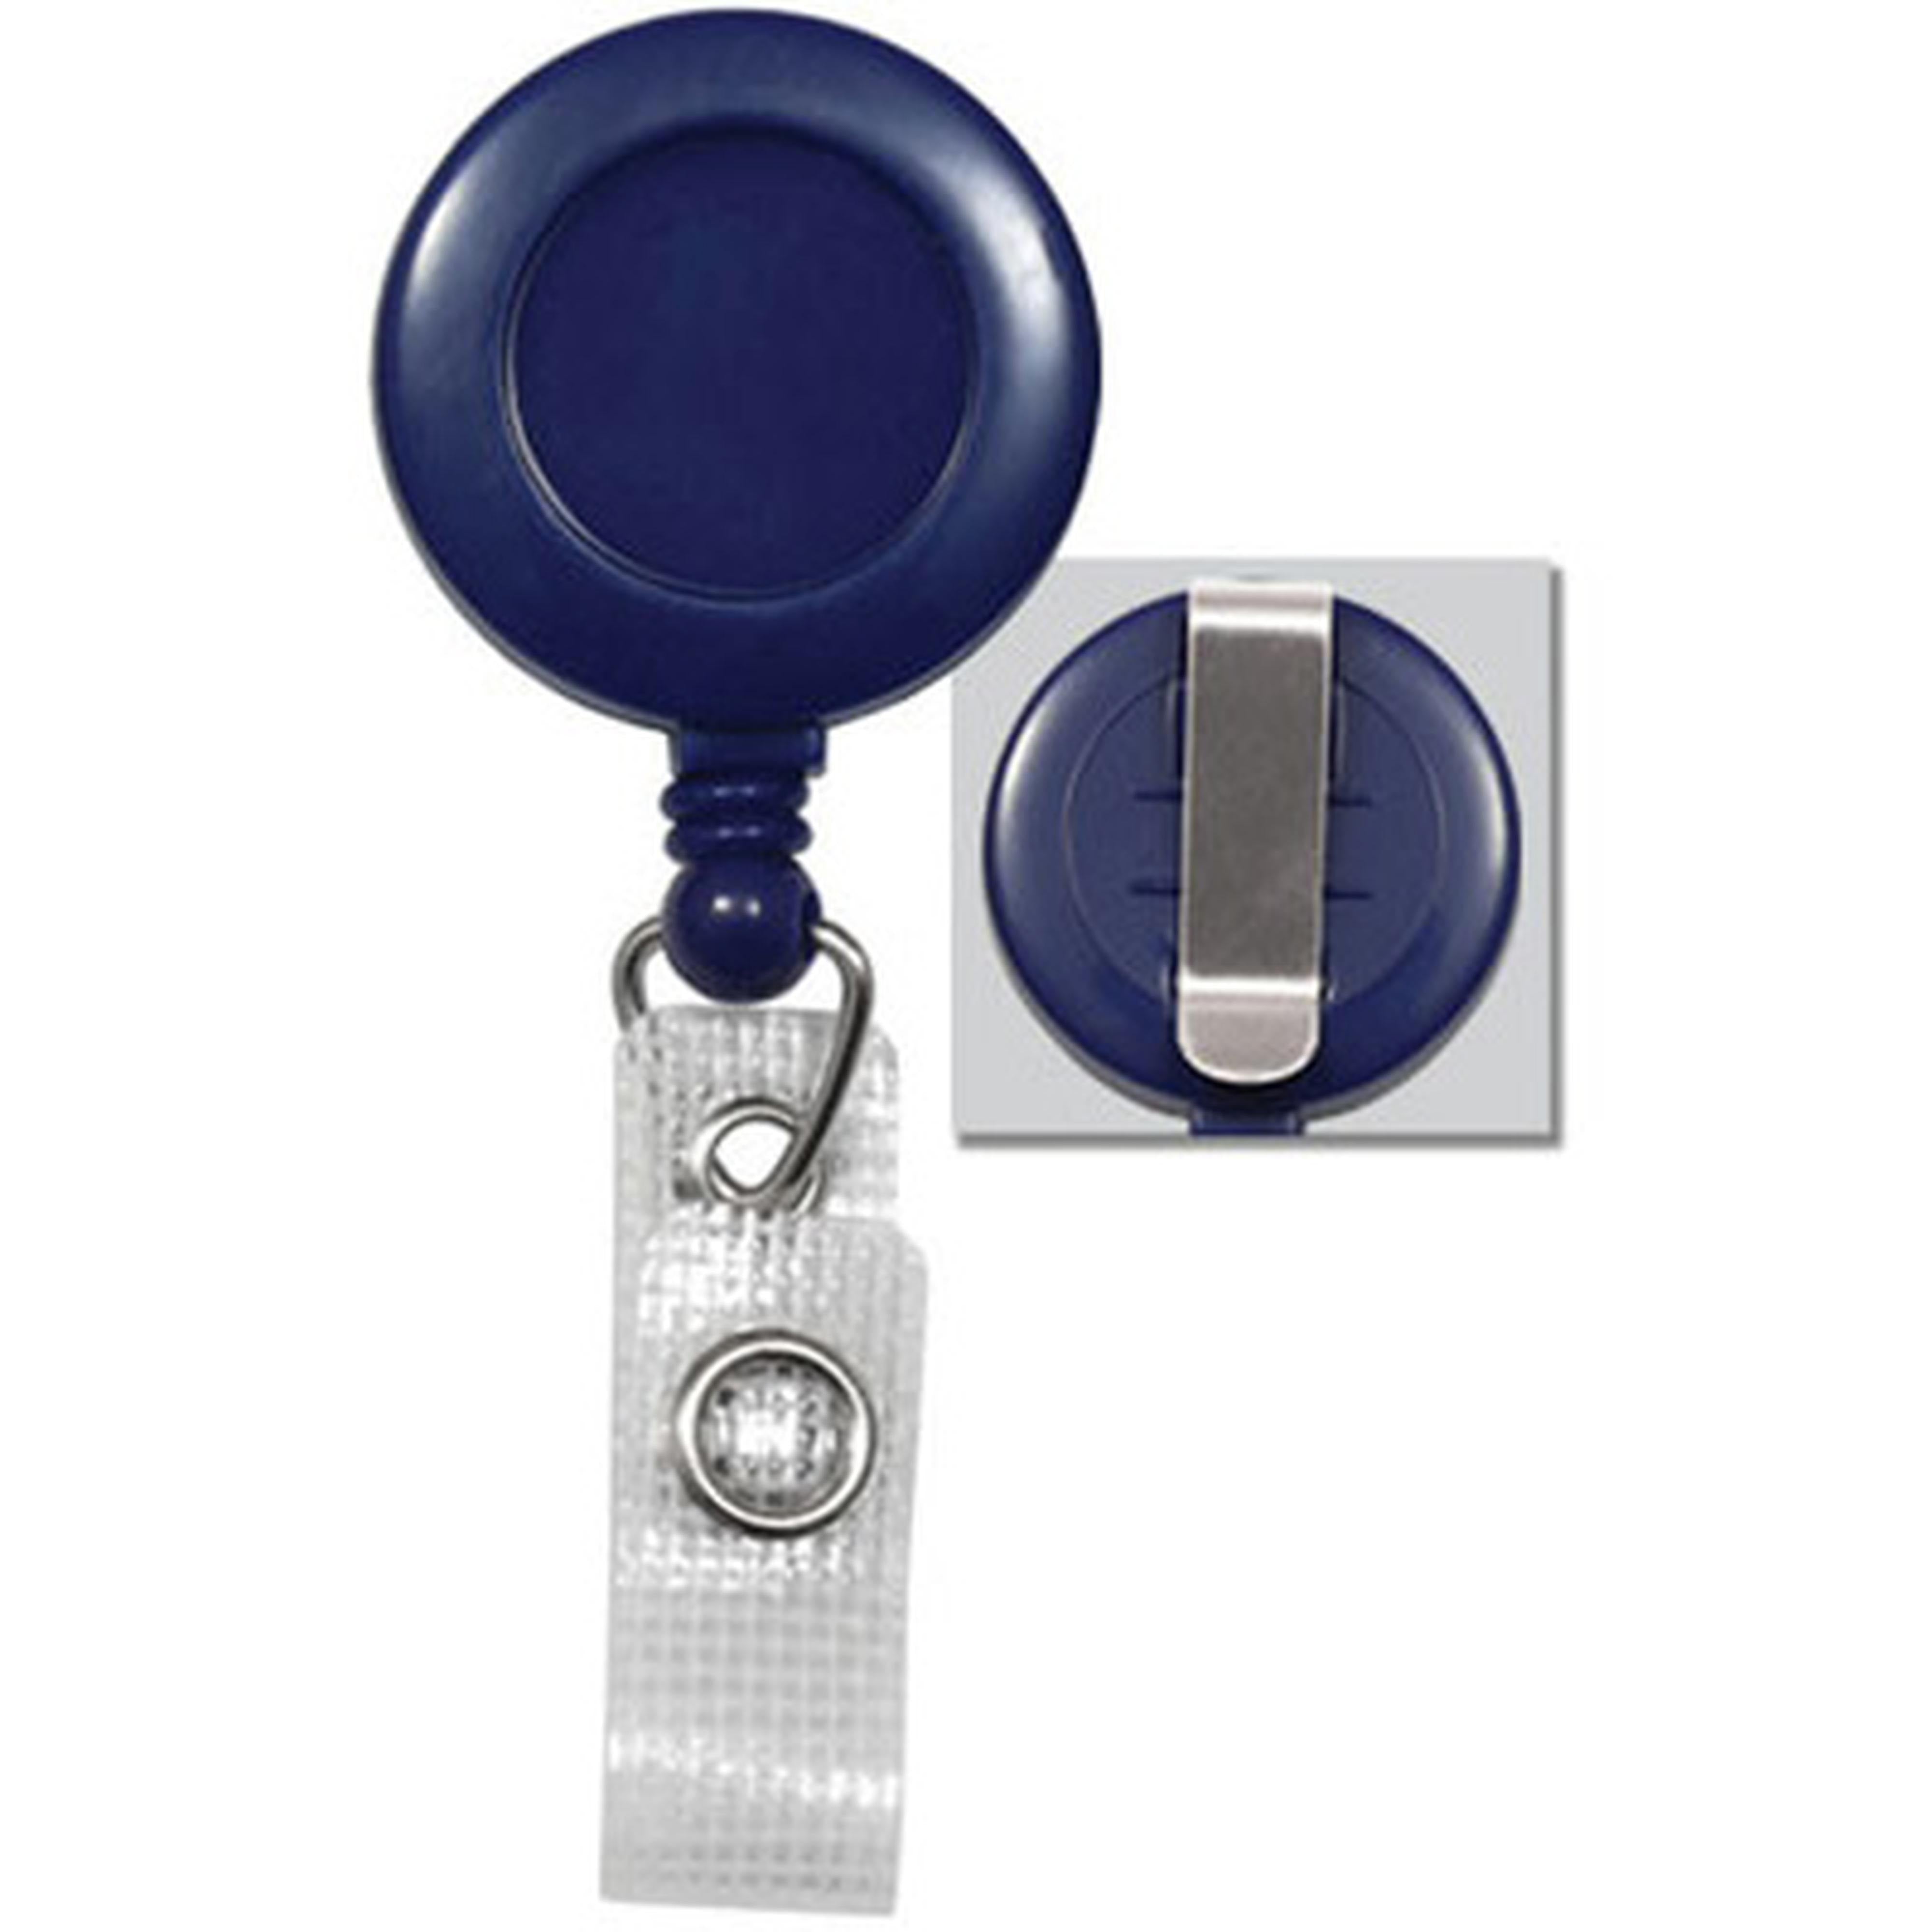 Shiny Gold Badge Reel - Retractable ID & Key Card Badge Reels with Belt Clip